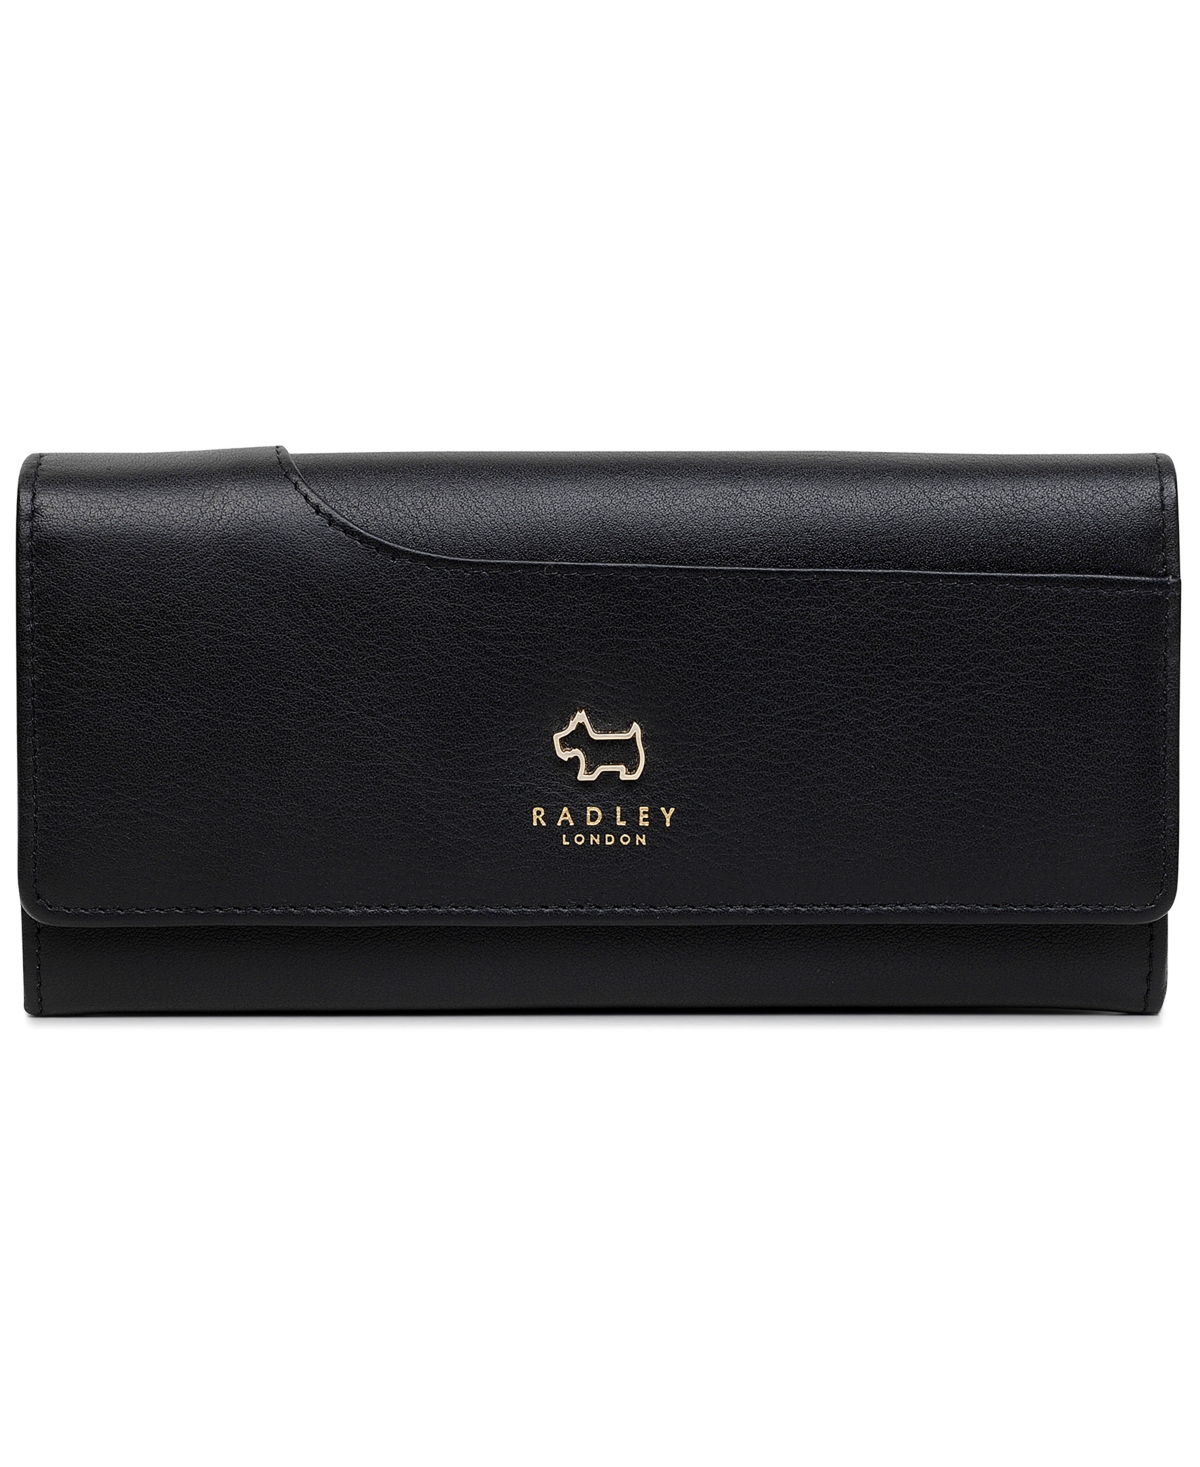 Radley London Large Flapover Leather Wallet In Black,gold